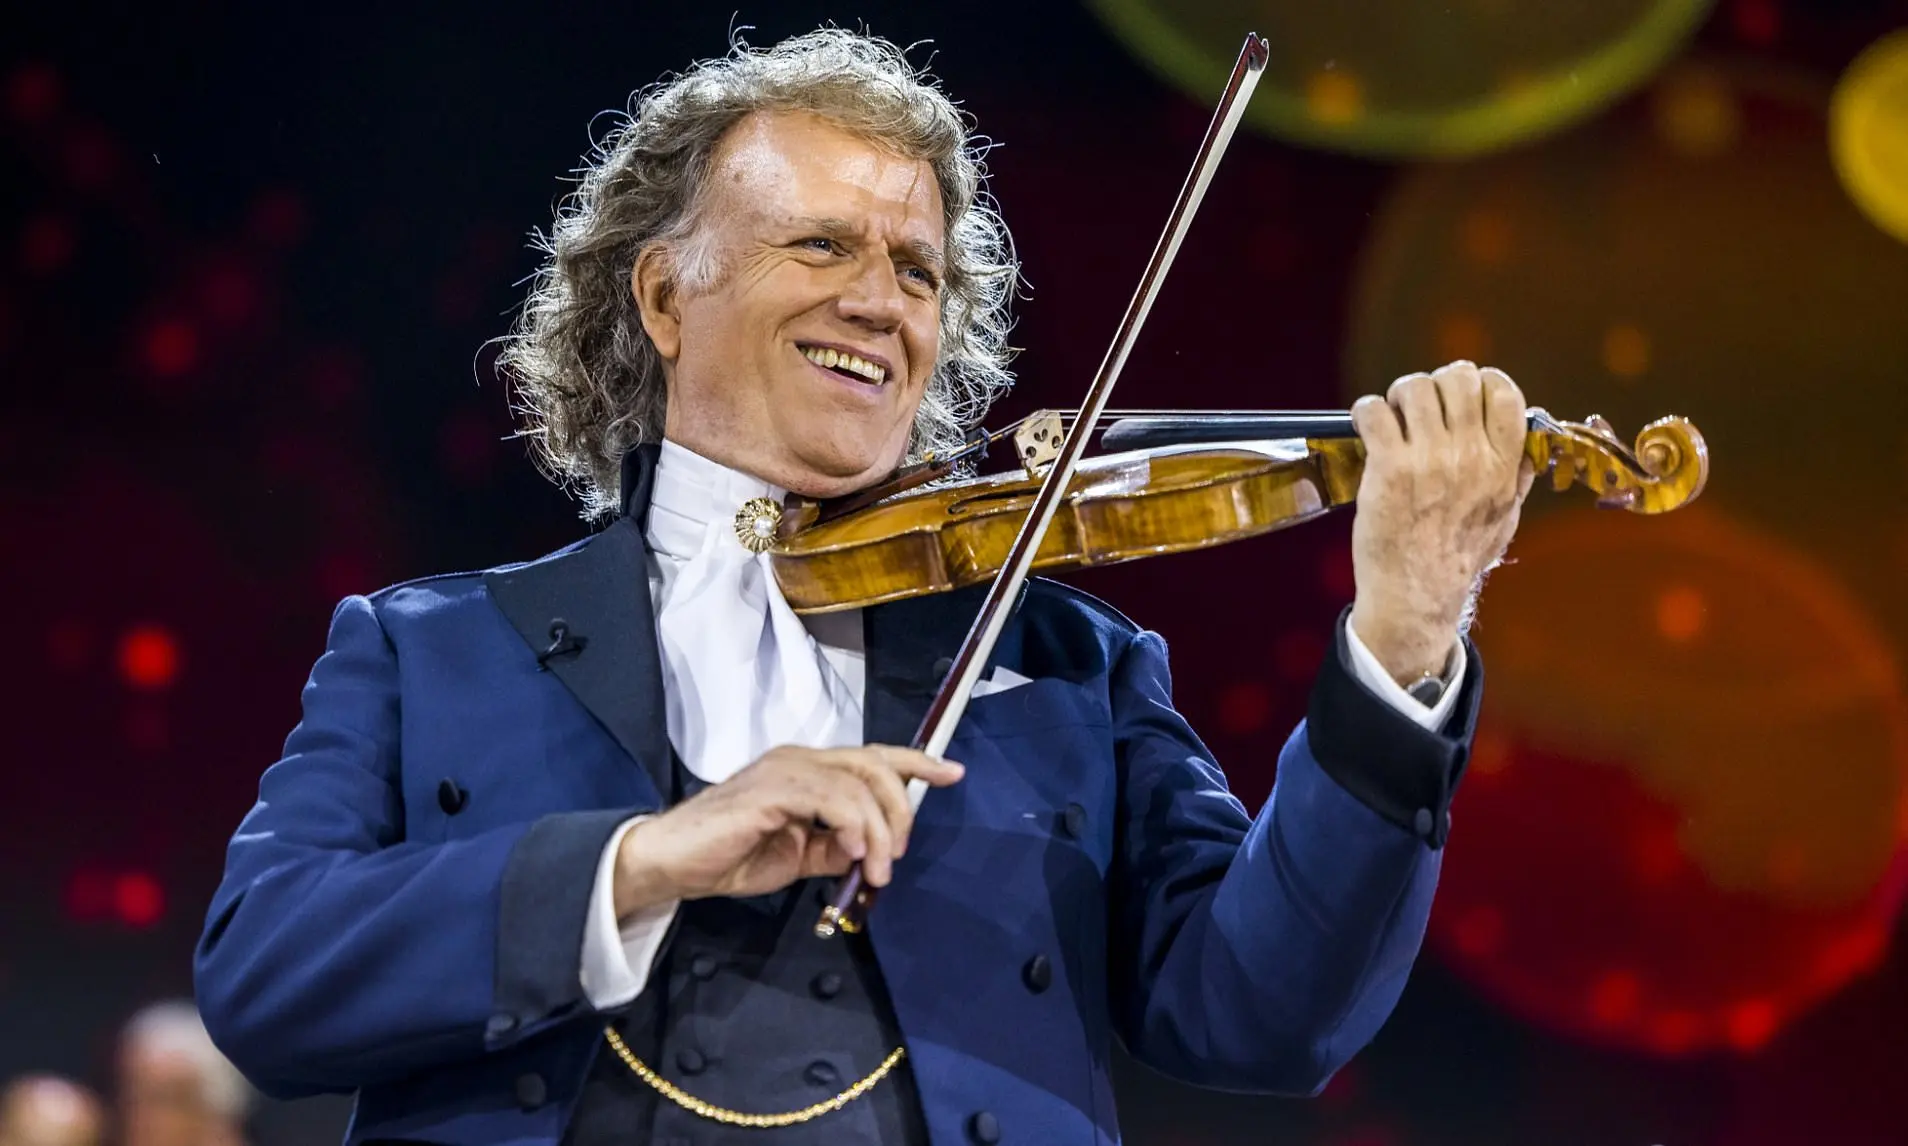 violin maastricht - How much does it cost to see André Rieu in Maastricht